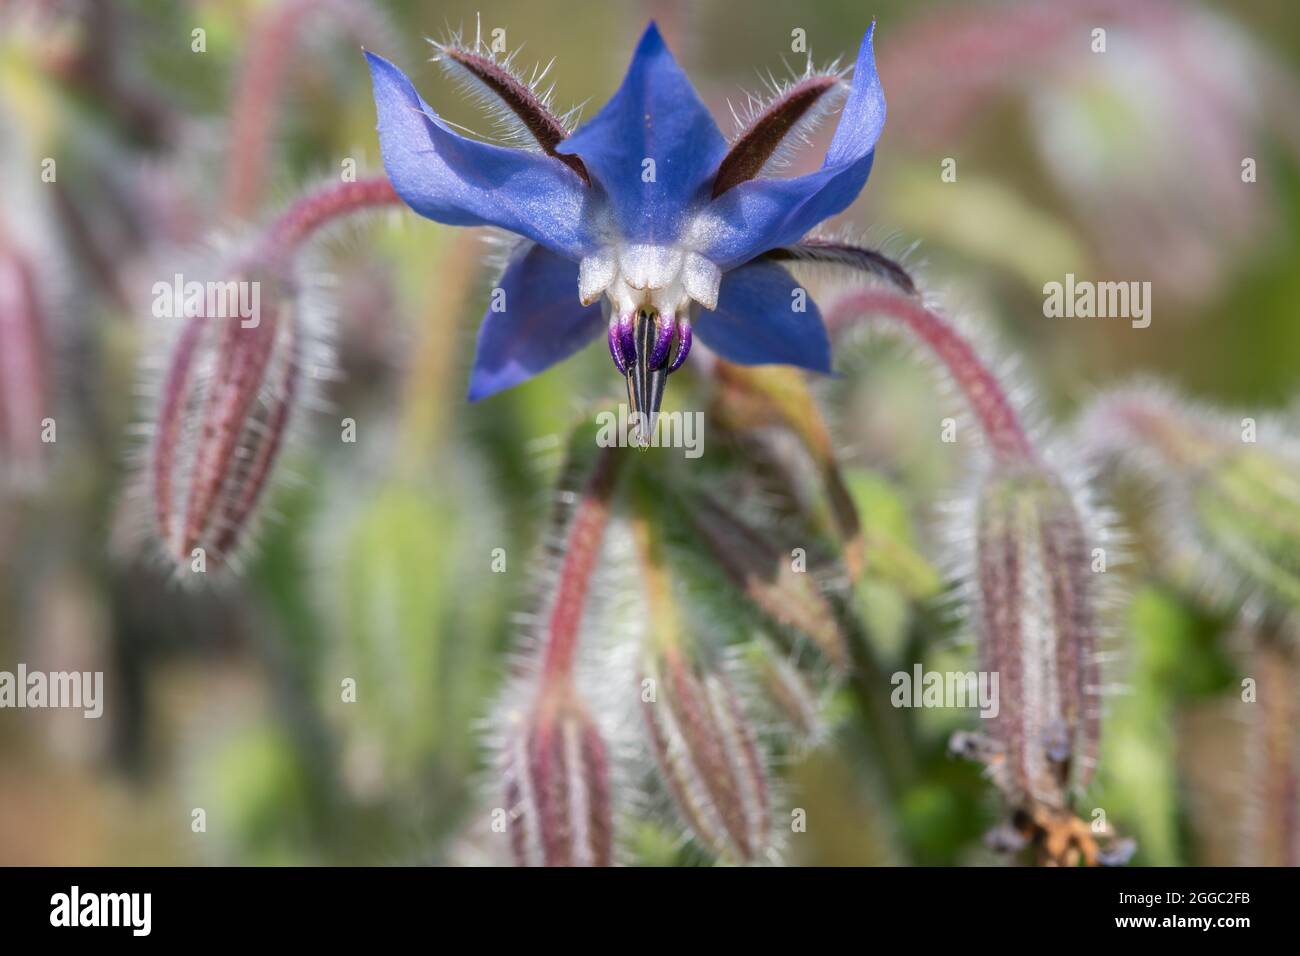 Close up of a borage (borago officinalis) flower in bloom Stock Photo